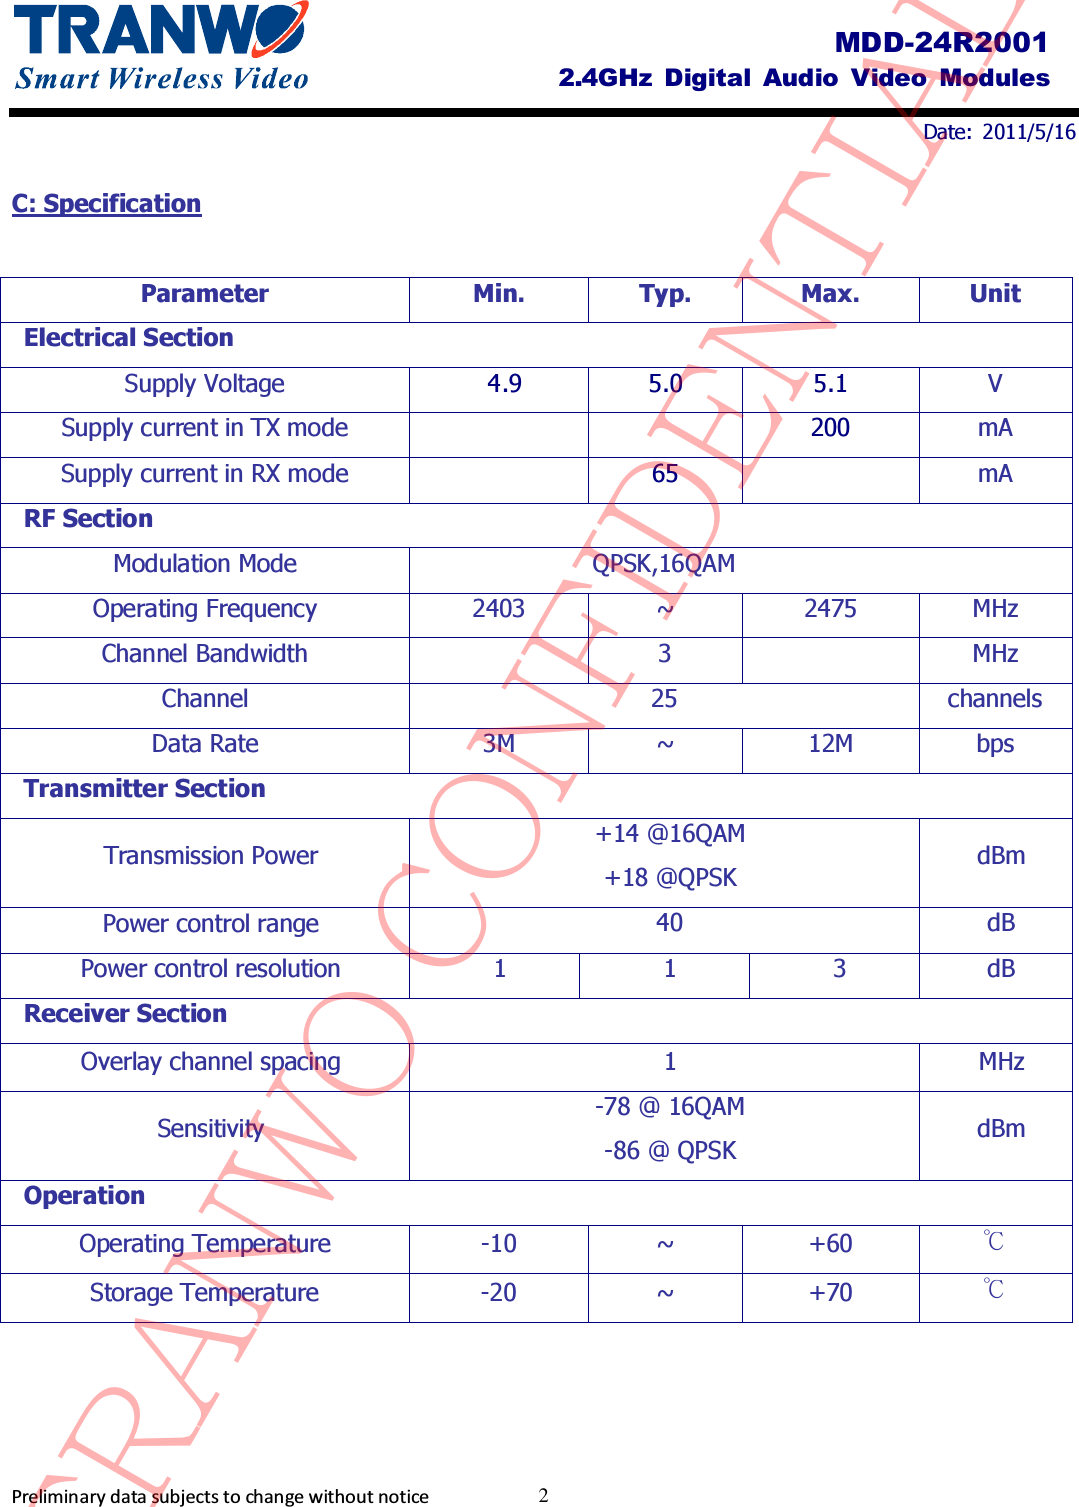                                Date:  2011/5/16     Preliminary data subjects to change without notice  2 MDD-24R2001 2.4GHz  Digital Audio  Video  Modules C: Specification   Parameter Min. Typ. Max. Unit Electrical Section Supply Voltage    4.9  5.0  5.1  V Supply current in TX mode     200  mA Supply current in RX mode   65    mA RF Section Modulation Mode  QPSK,16QAM   Operating Frequency  2403  ~  2475  MHz Channel Bandwidth    3    MHz Channel  25  channels Data Rate  3M  ~  12M  bps Transmitter Section Transmission Power +14 @16QAM +18 @QPSK  dBm Power control range 40  dB Power control resolution  1  1  3  dB Receiver Section Overlay channel spacing  1  MHz Sensitivity  -78 @ 16QAM -86 @ QPSK dBm Operation Operating Temperature  -10  ~  +60  ℃ Storage Temperature  -20  ~  +70  ℃  TRANWO CONFIDENTIAL